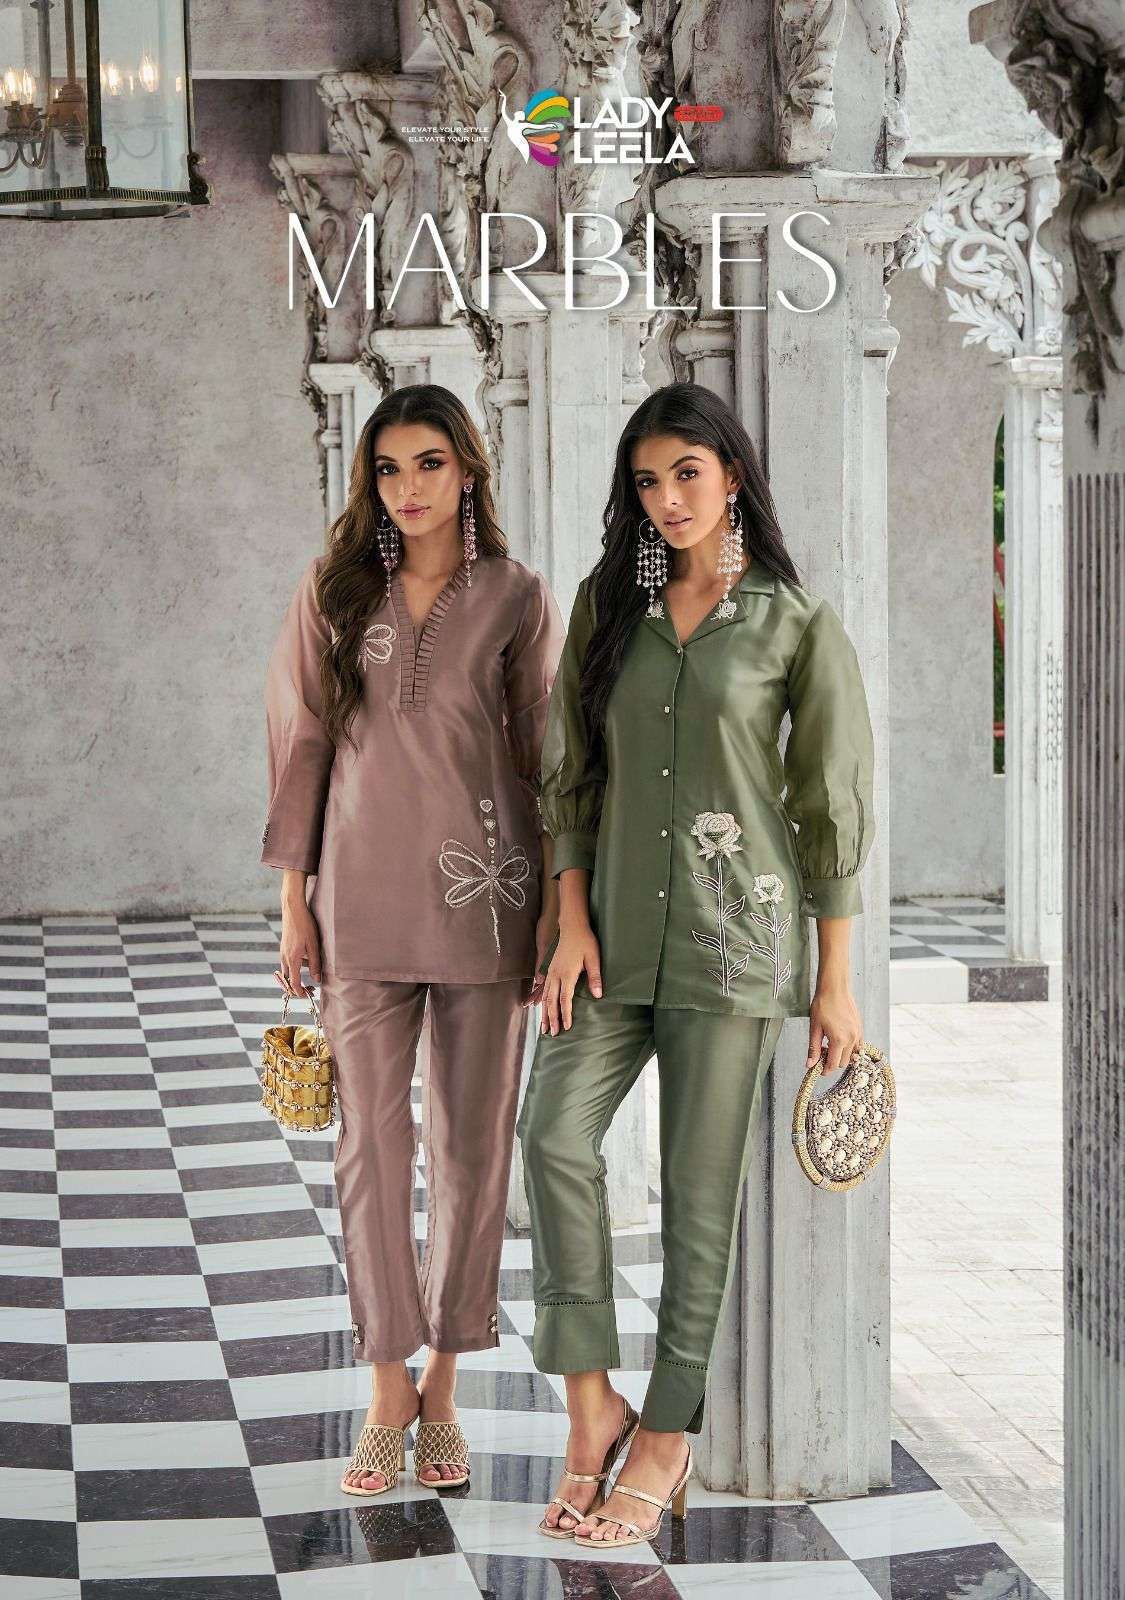 Malbles Buy Lily & Lali Online Wholesaler Latest Collection Co-ord Set